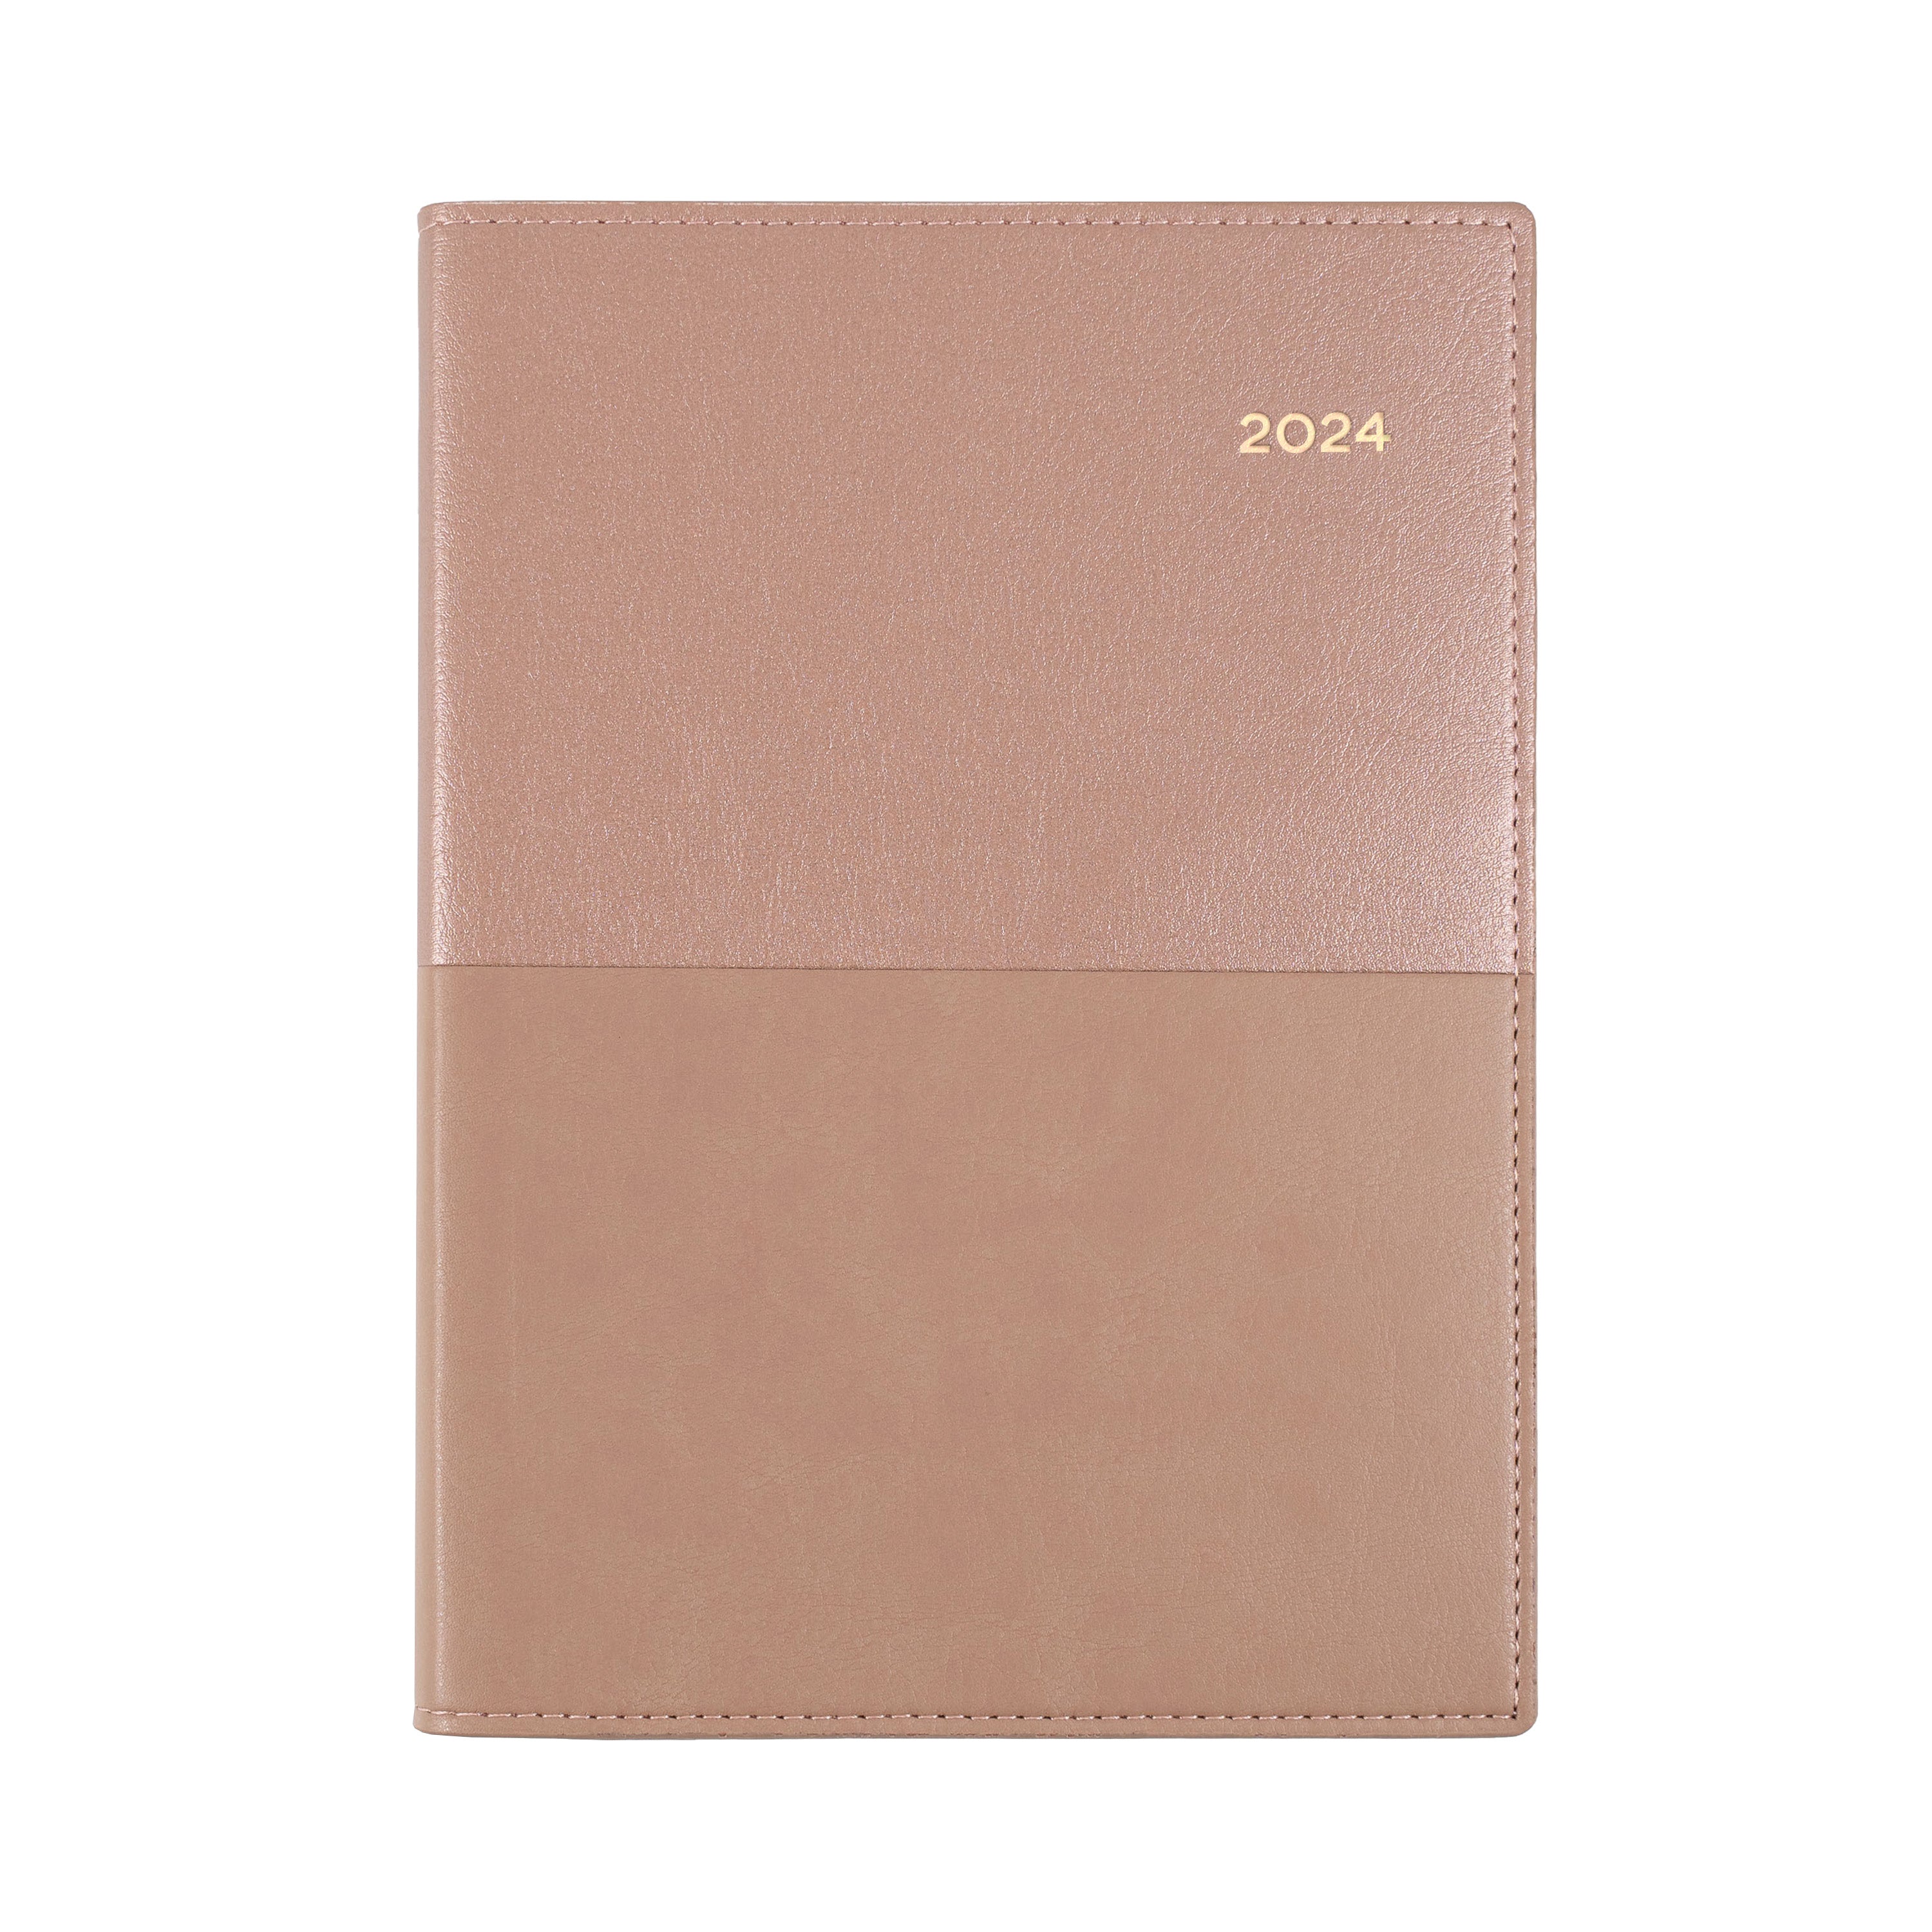 Collins Vanessa 2024 Diary - Day to a Page View (8am - 6pm, 1/2 hourly)